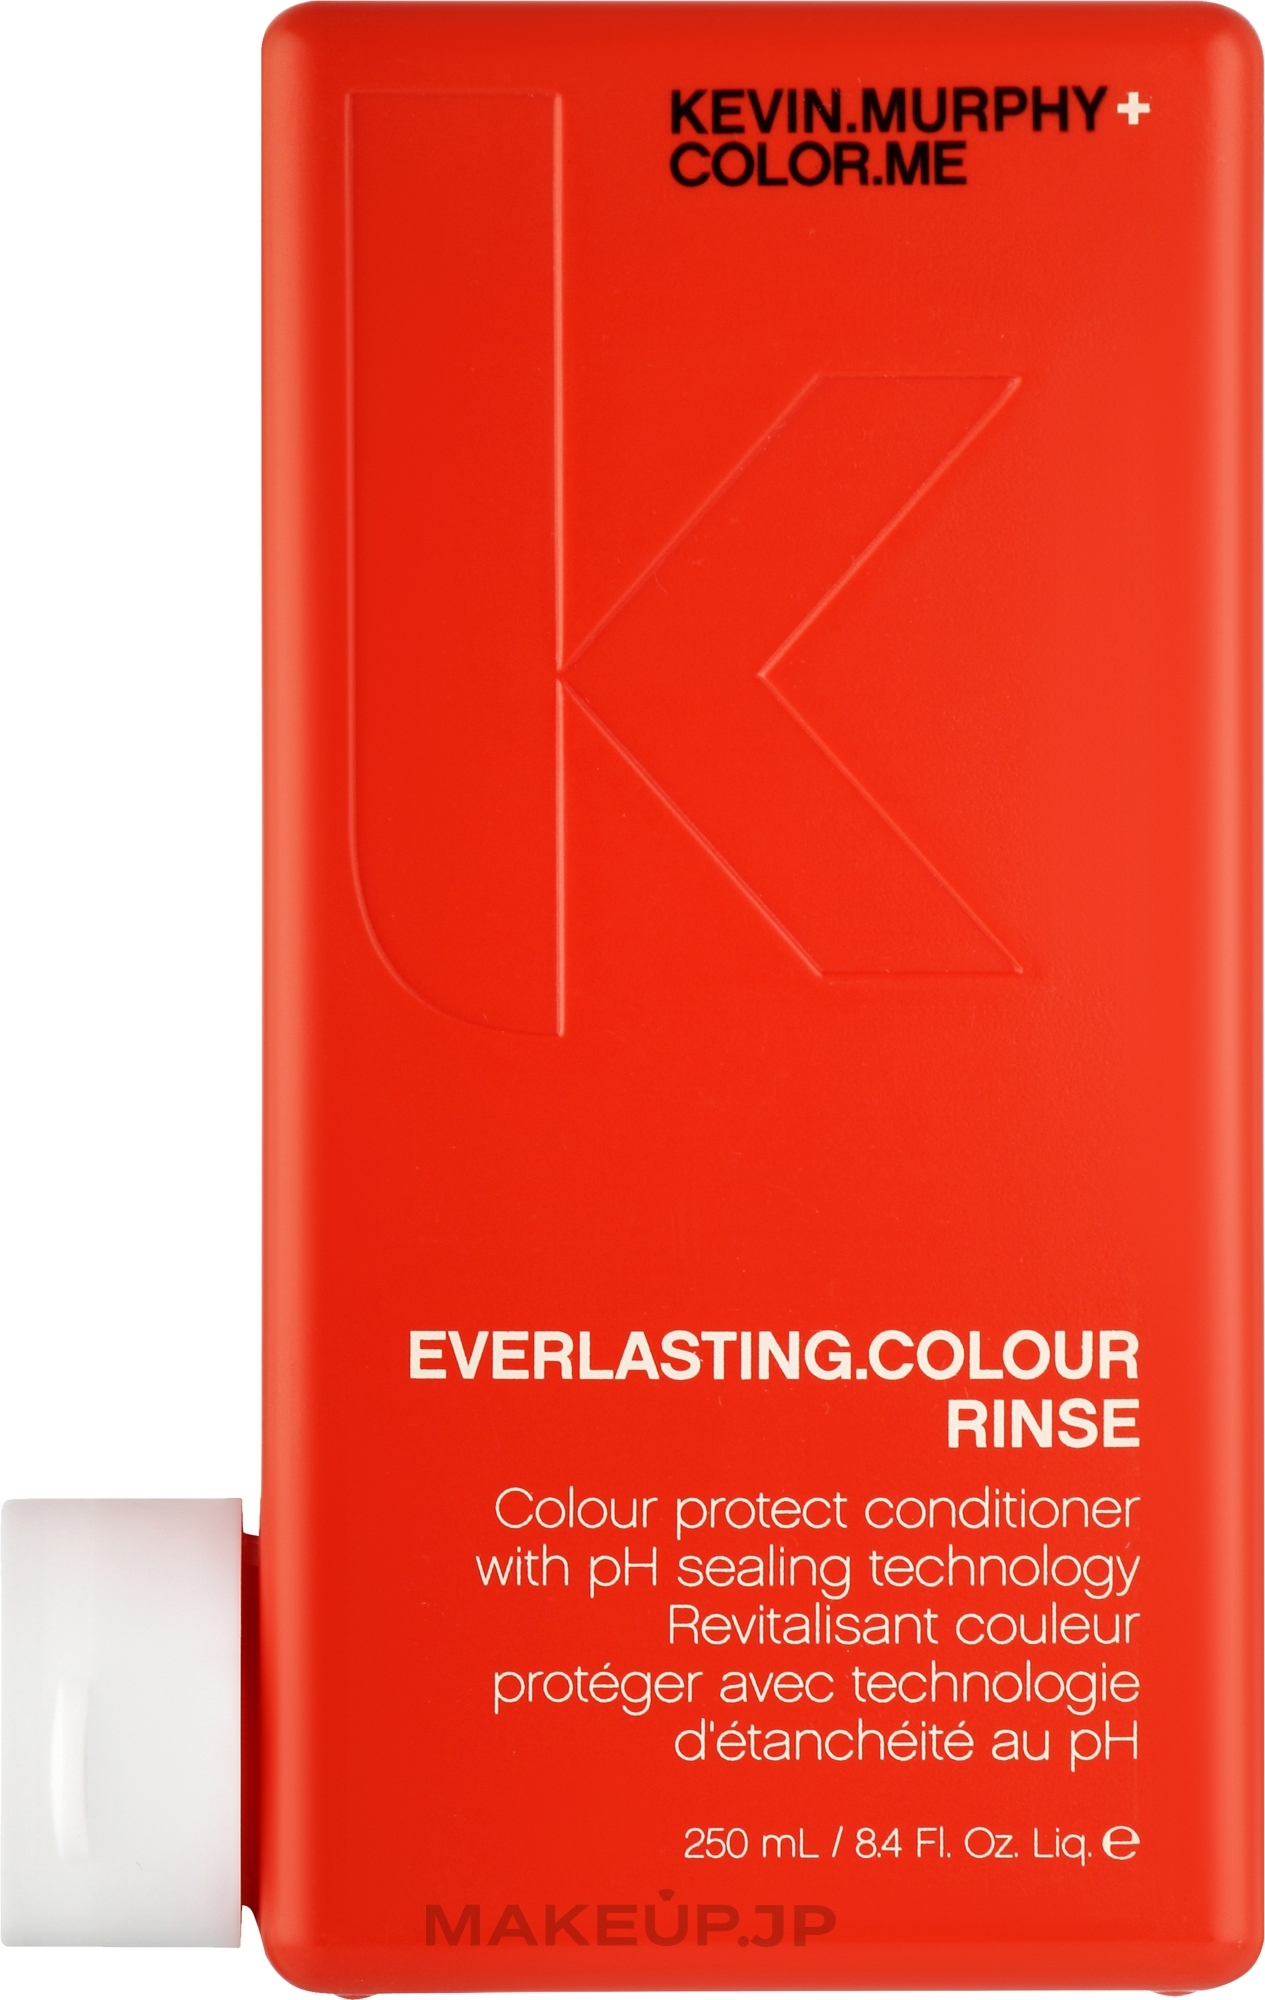 Color Protection Conditioner - Kevin.Murphy Everlasting.Colour Rinse — photo 250 ml